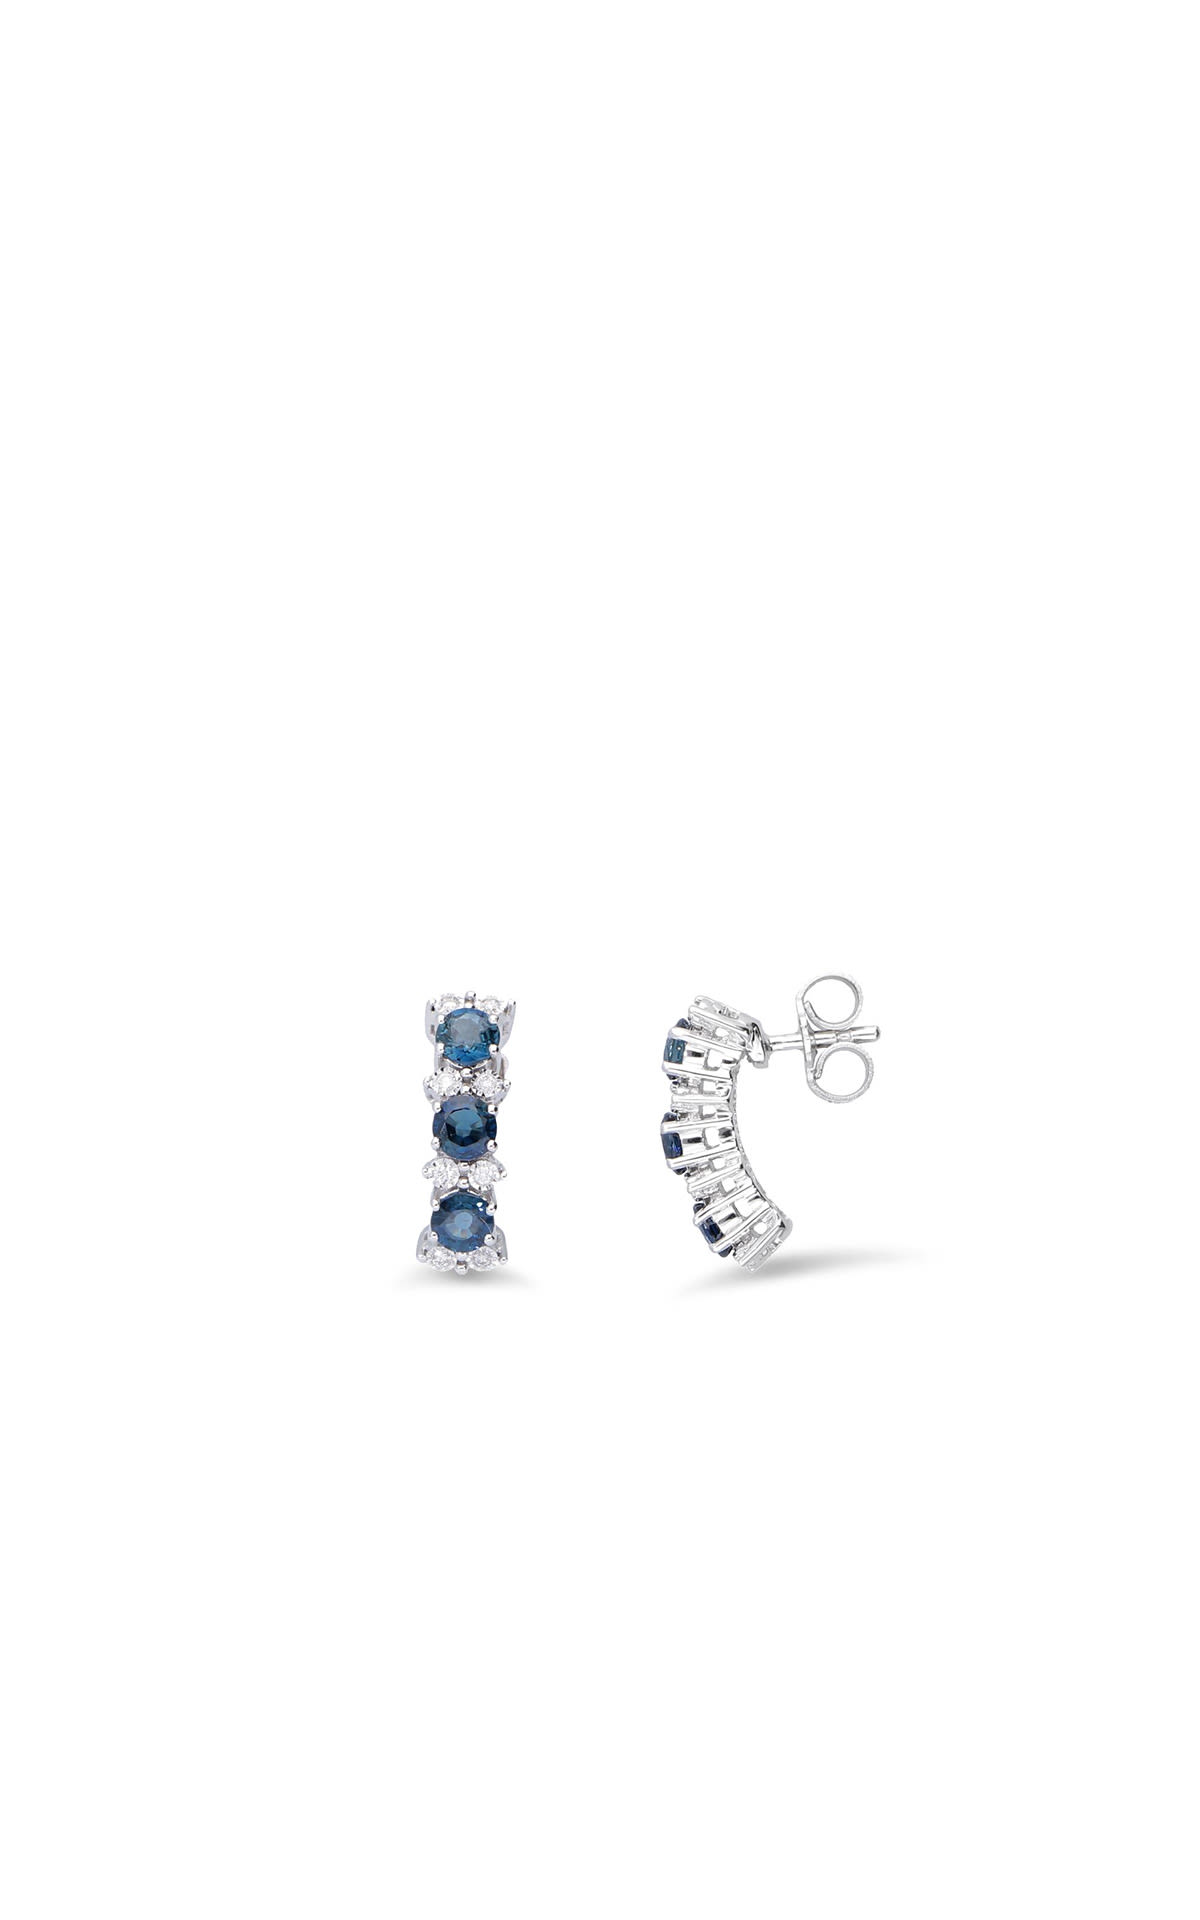 White gold trilogy earrings with diamonds and sapphires Luxury Zone